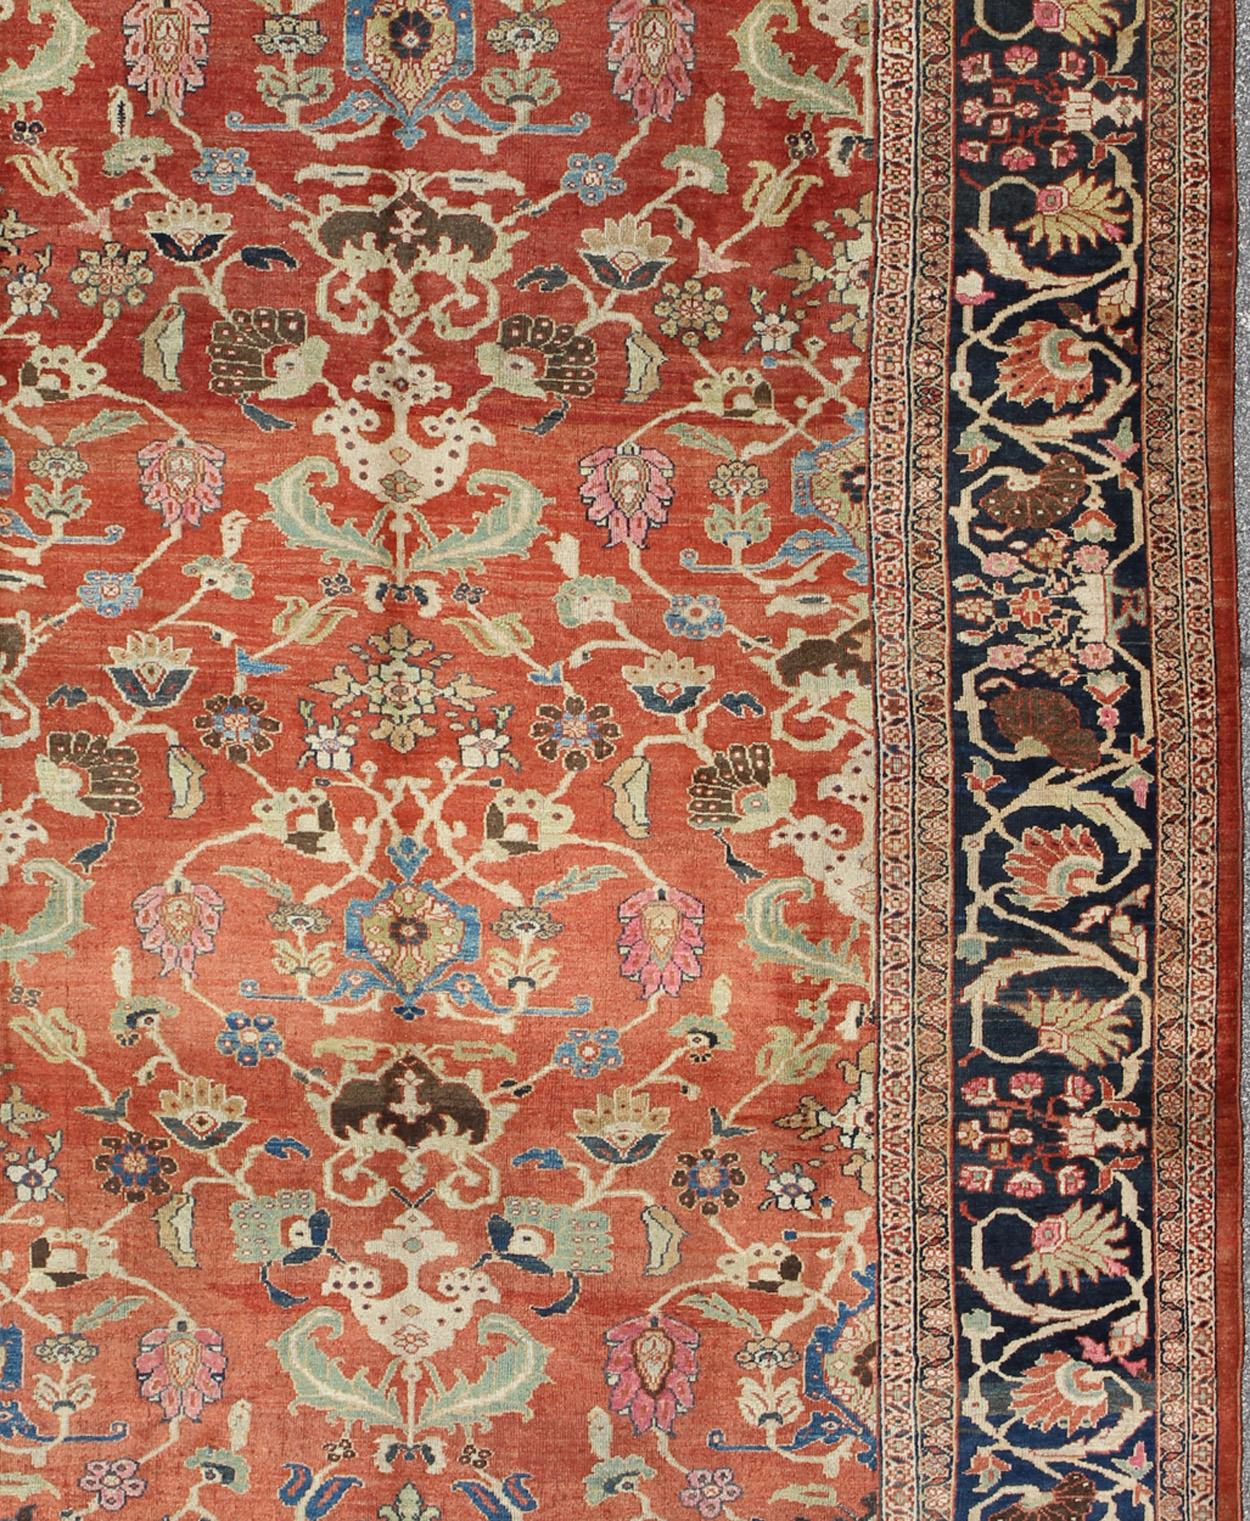 Hand-Knotted Sultanabad Rug with All-Over Design, Keivan Woven Arts; rug G-0204, country of origin / type: Iran / Sultanabad, circa 1900.
Measures: 10.6 x 14.1.
This inspiring turn-of-the-century Sultanabad draws heavily from nature for its